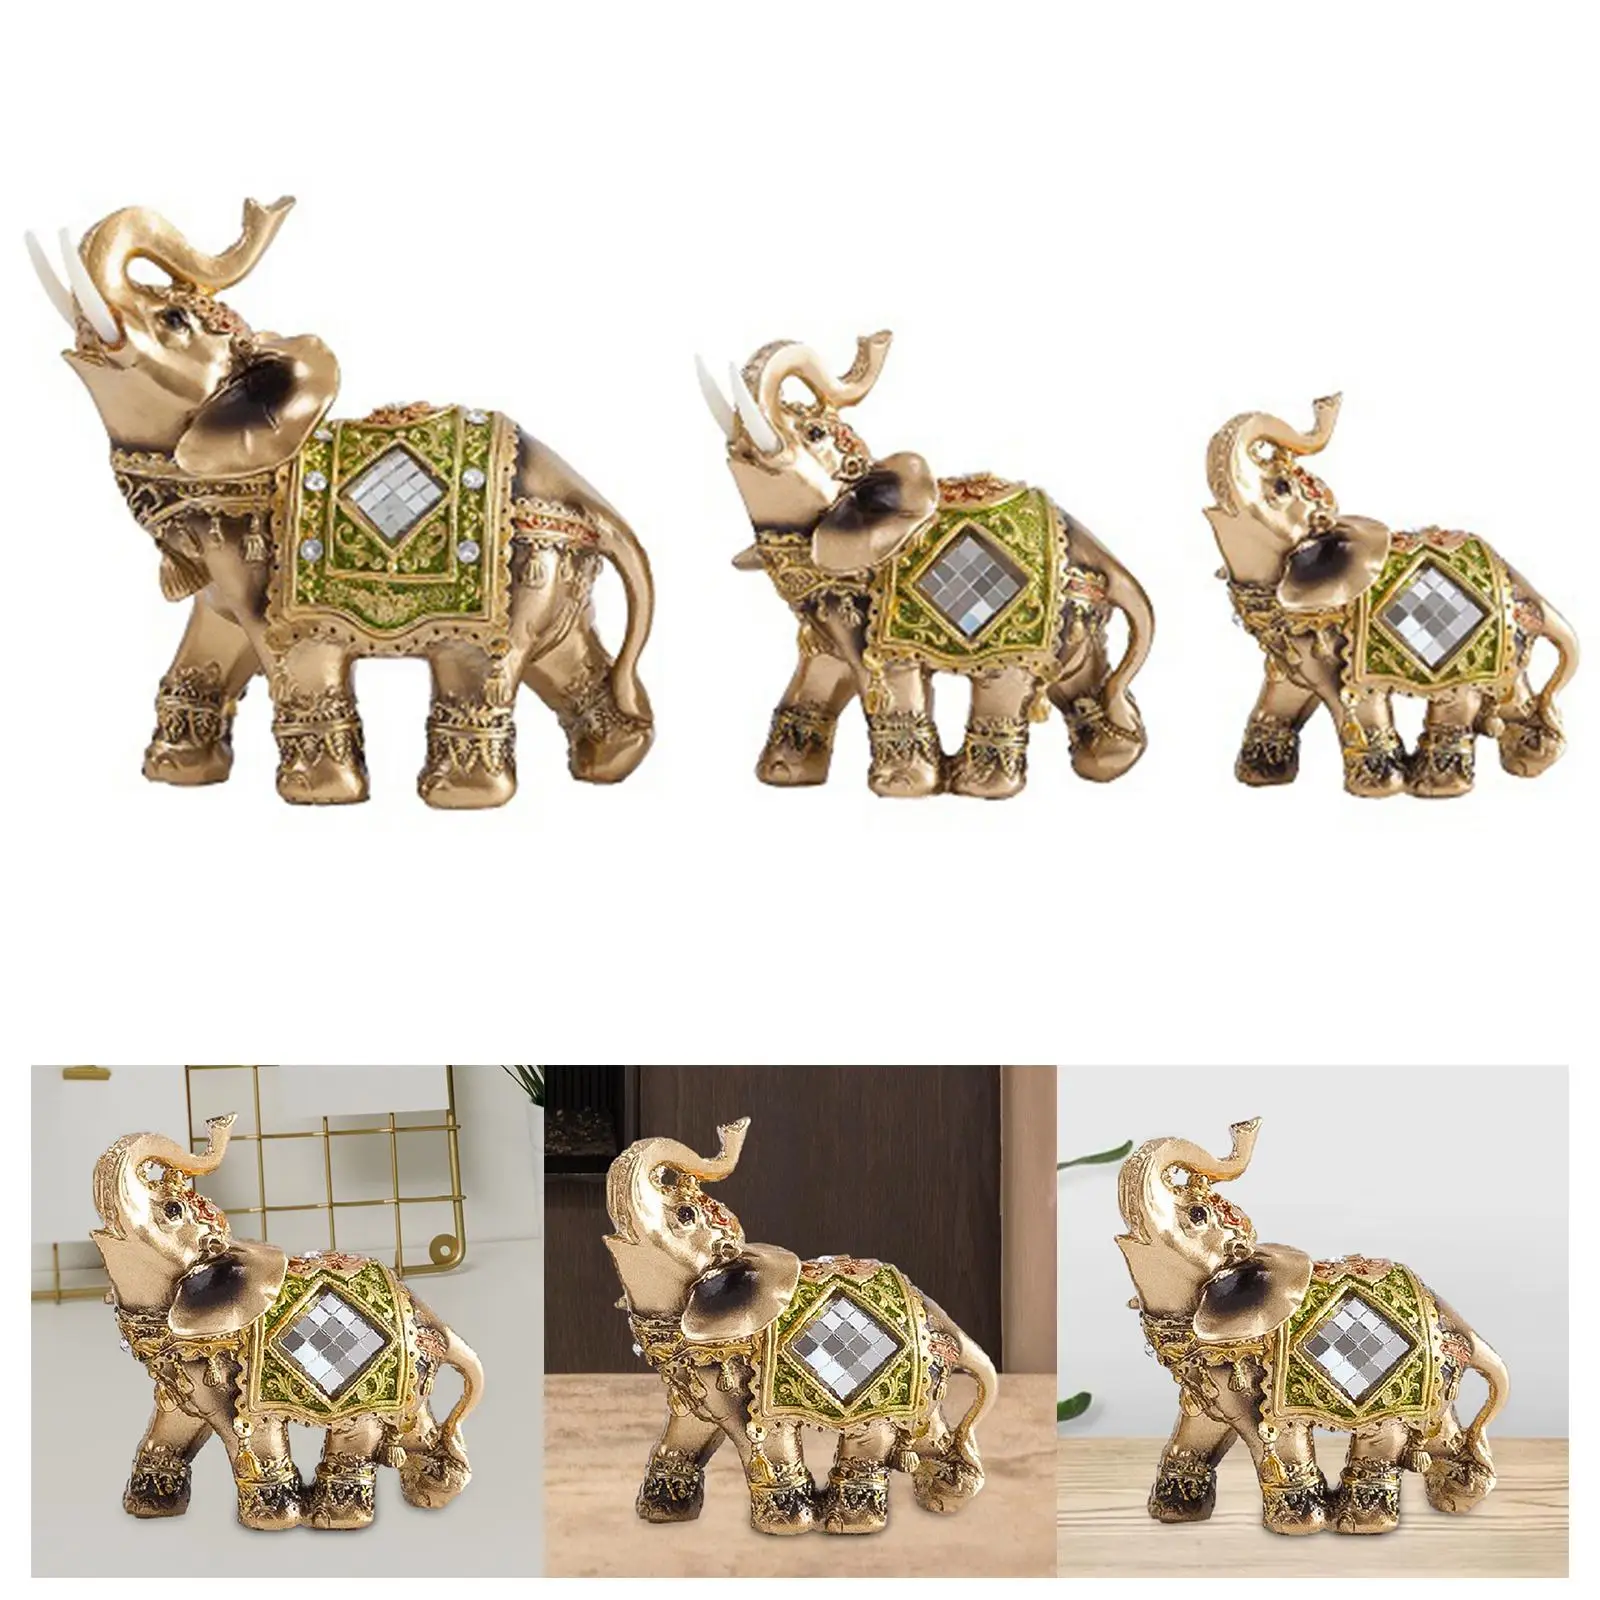 Elephant Decor Resin Elephant Statues Creative Elephant Sculpture Collectible Figurines for Home, Living Room, Party Decor